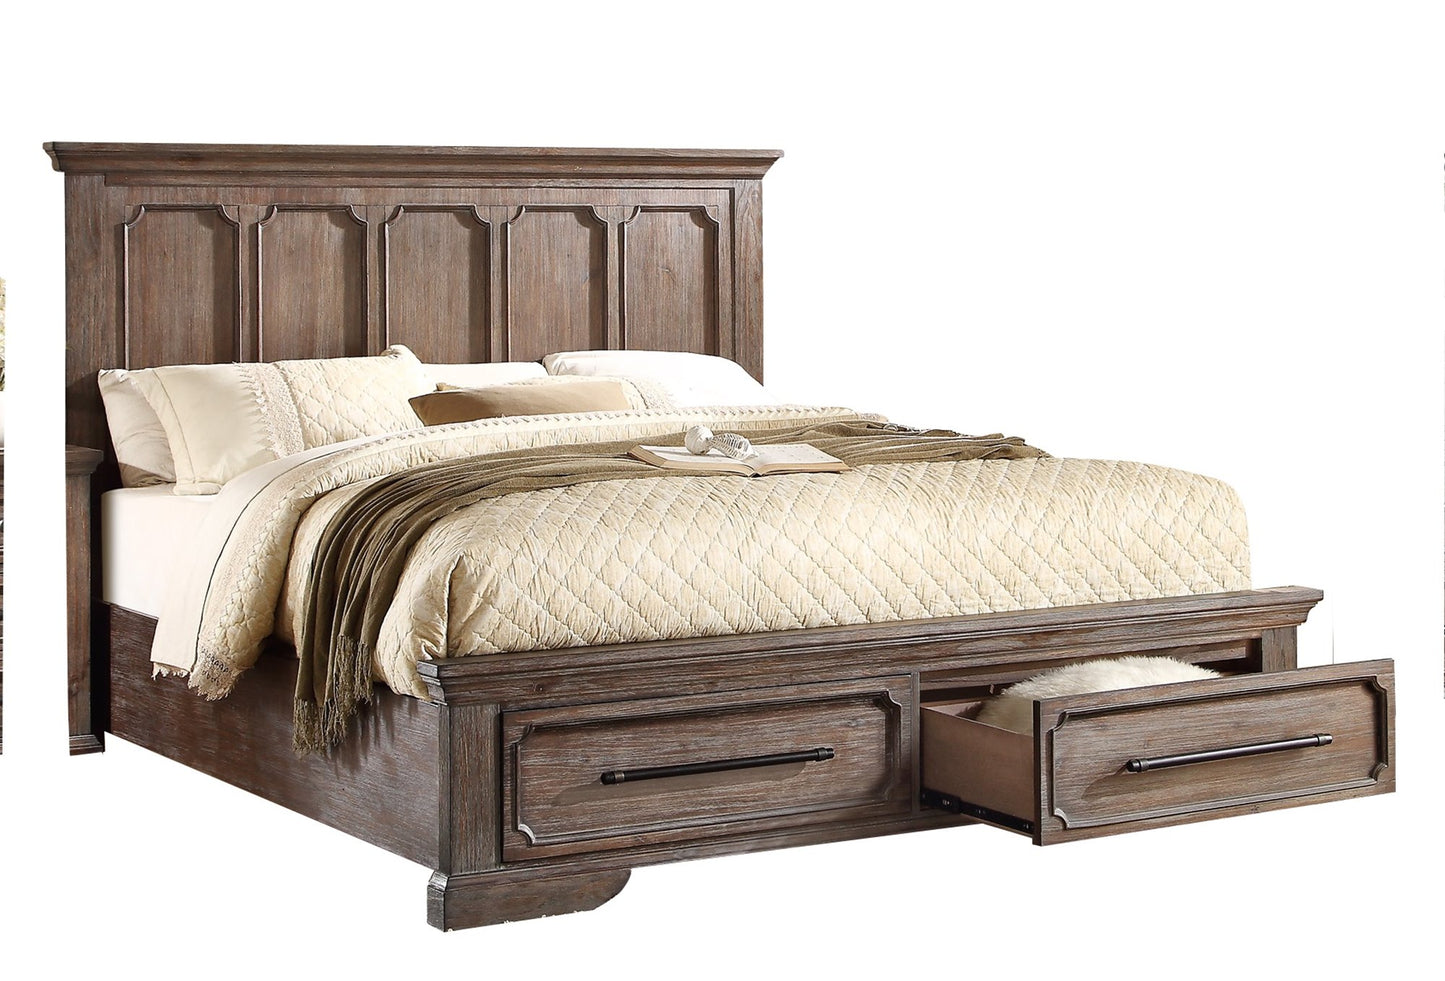 Homelegance Toulon 5PC Bedroom Set E King Platform Bed with Footboard Storages Dresser Mirror One Nightstand Chest in Distressed Oak